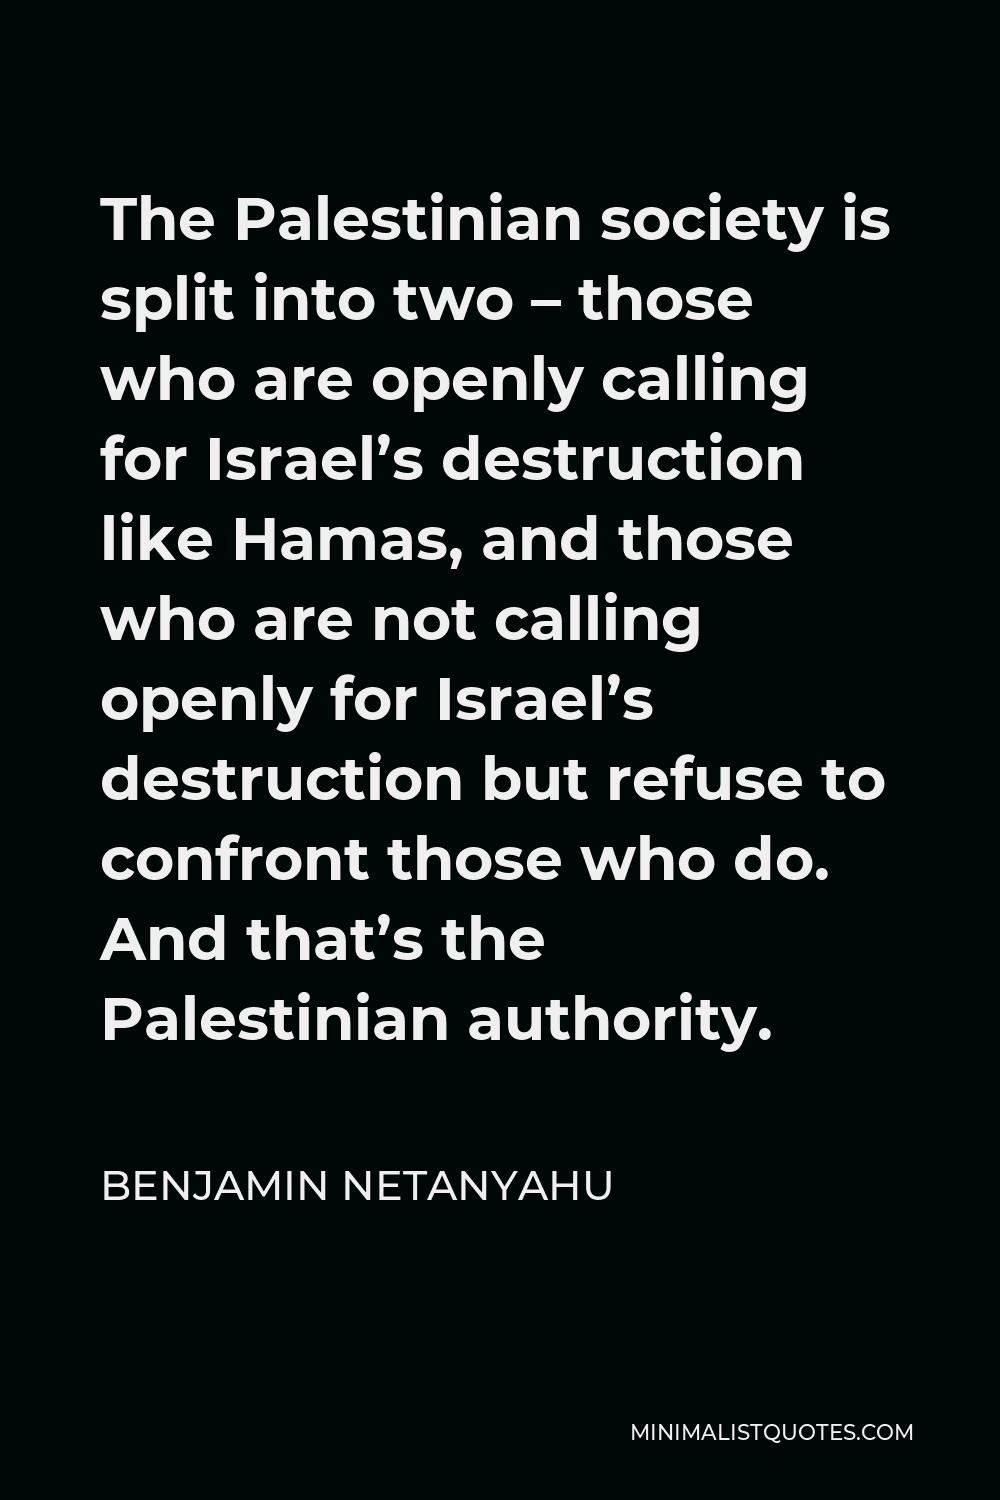 Benjamin Netanyahu Quote - The Palestinian society is split into two – those who are openly calling for Israel’s destruction like Hamas, and those who are not calling openly for Israel’s destruction but refuse to confront those who do. And that’s the Palestinian authority.